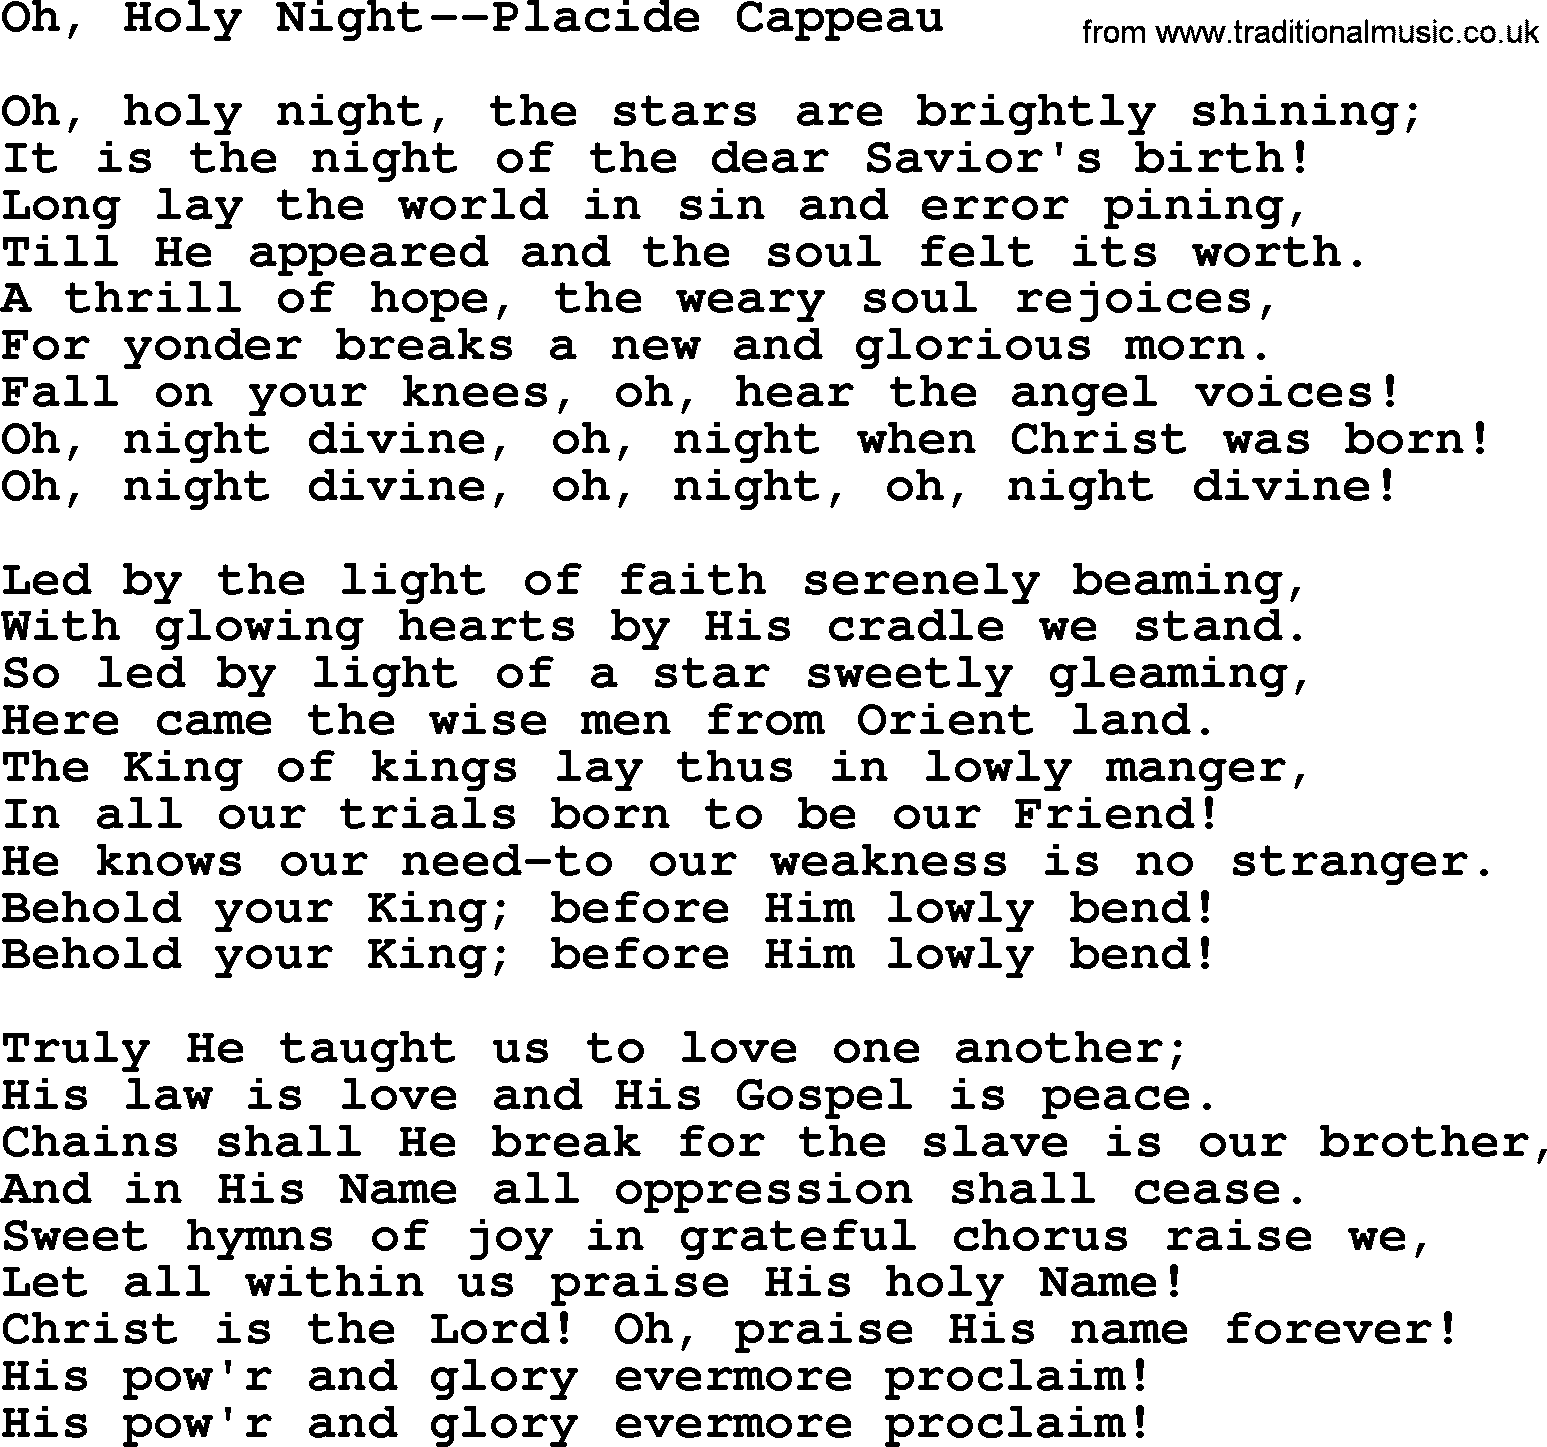 Hymns about Angels, Hymn: Oh, Holy Night--placide Cappeau.txt lyrics with PDF